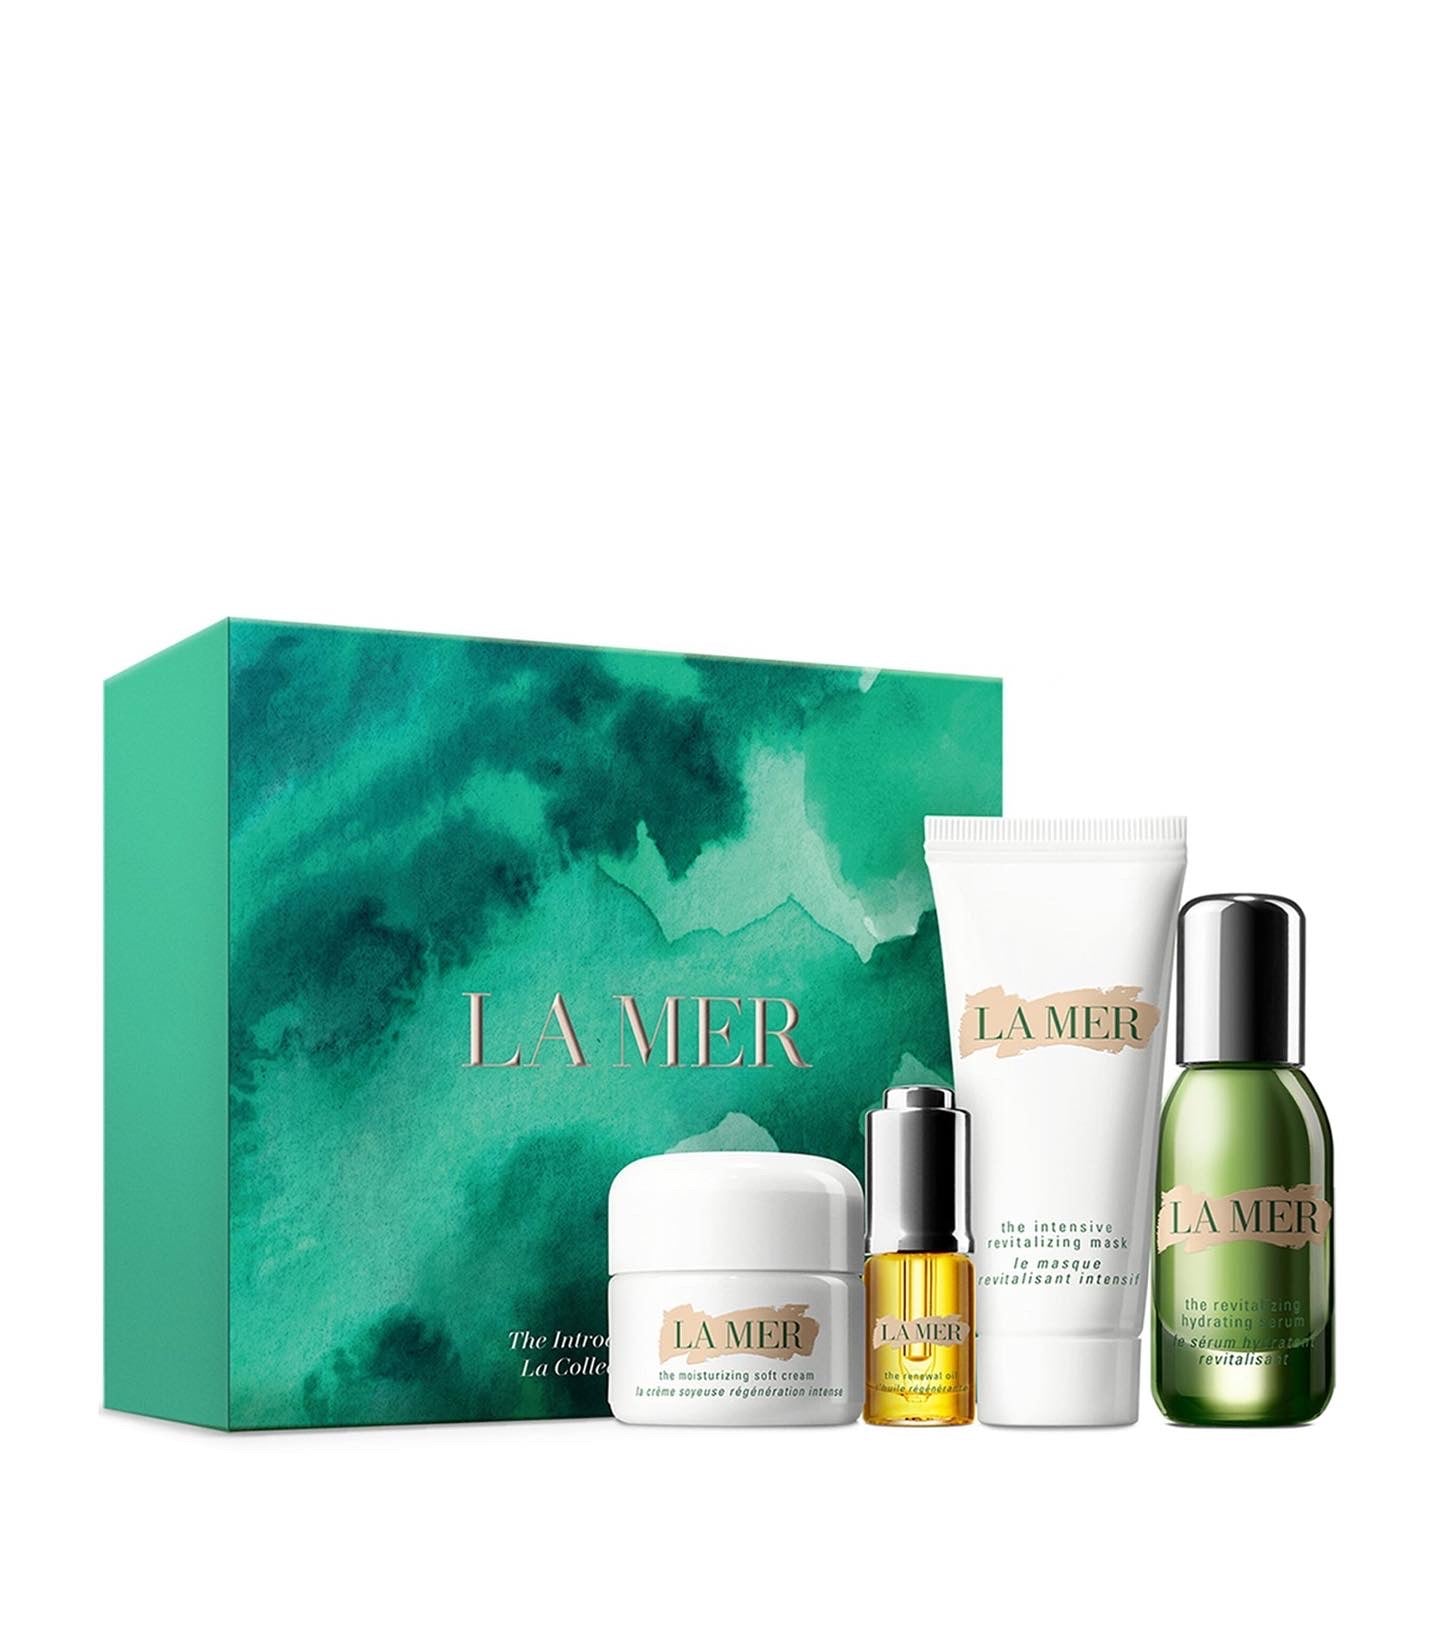 LA MER, THE INFUSSED RENEWAL COLLECTION